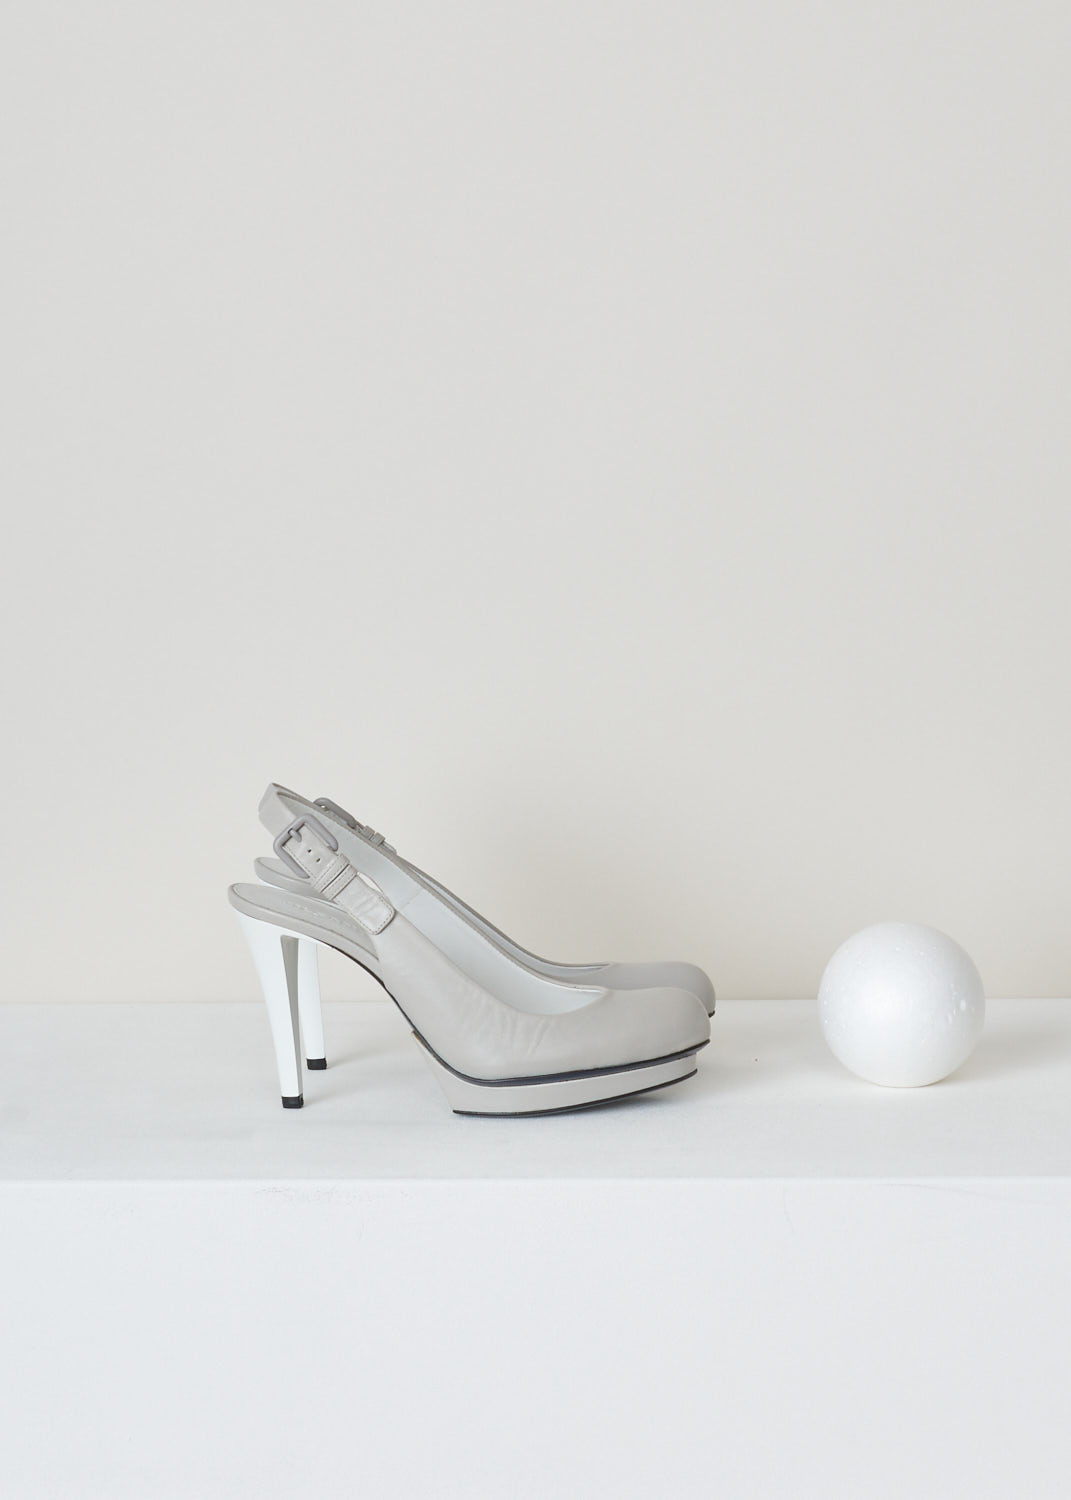 Jil Sanders, Slingback platform pumps in grey, JS22026_9A2M7_talco_807_polvere, grey, side, Lovely slingbacks pumps made with a platform underneath to spice it up a bit. fastening option being the buckle on the back.

Heel Height: 9 cm / 3.5 inch.  